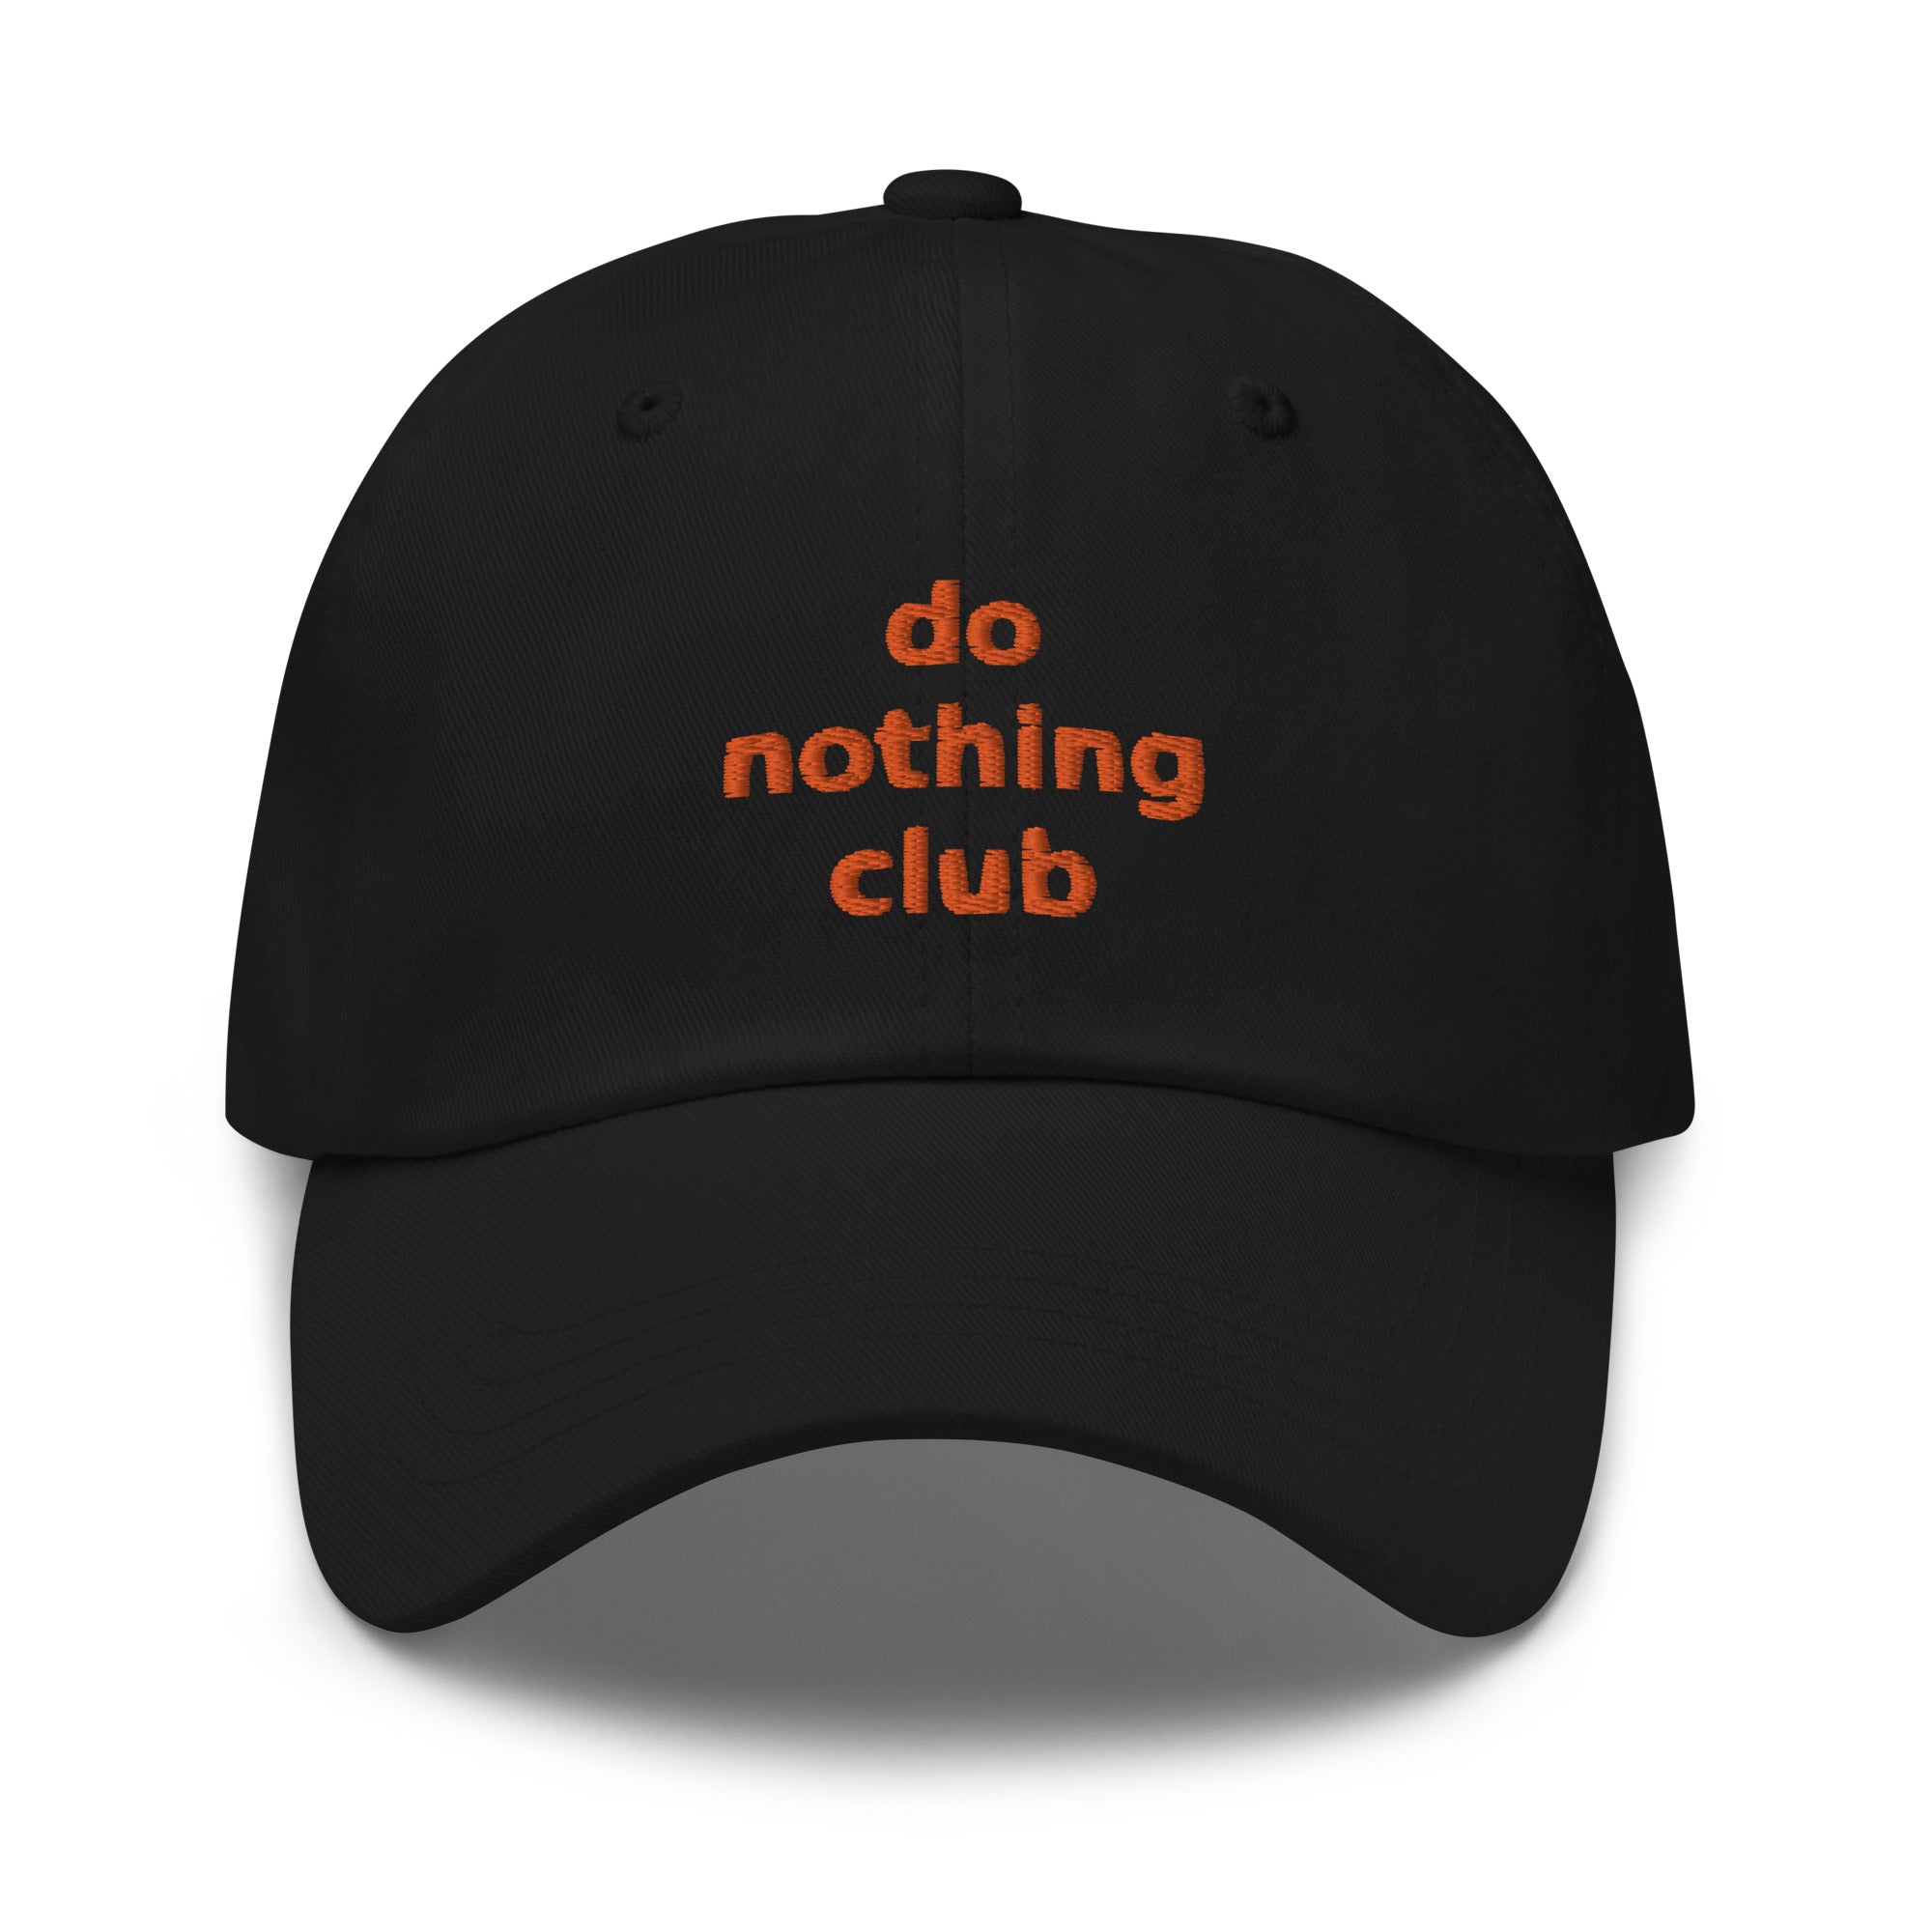 Do Nothing Club Dad hat – universal controversial